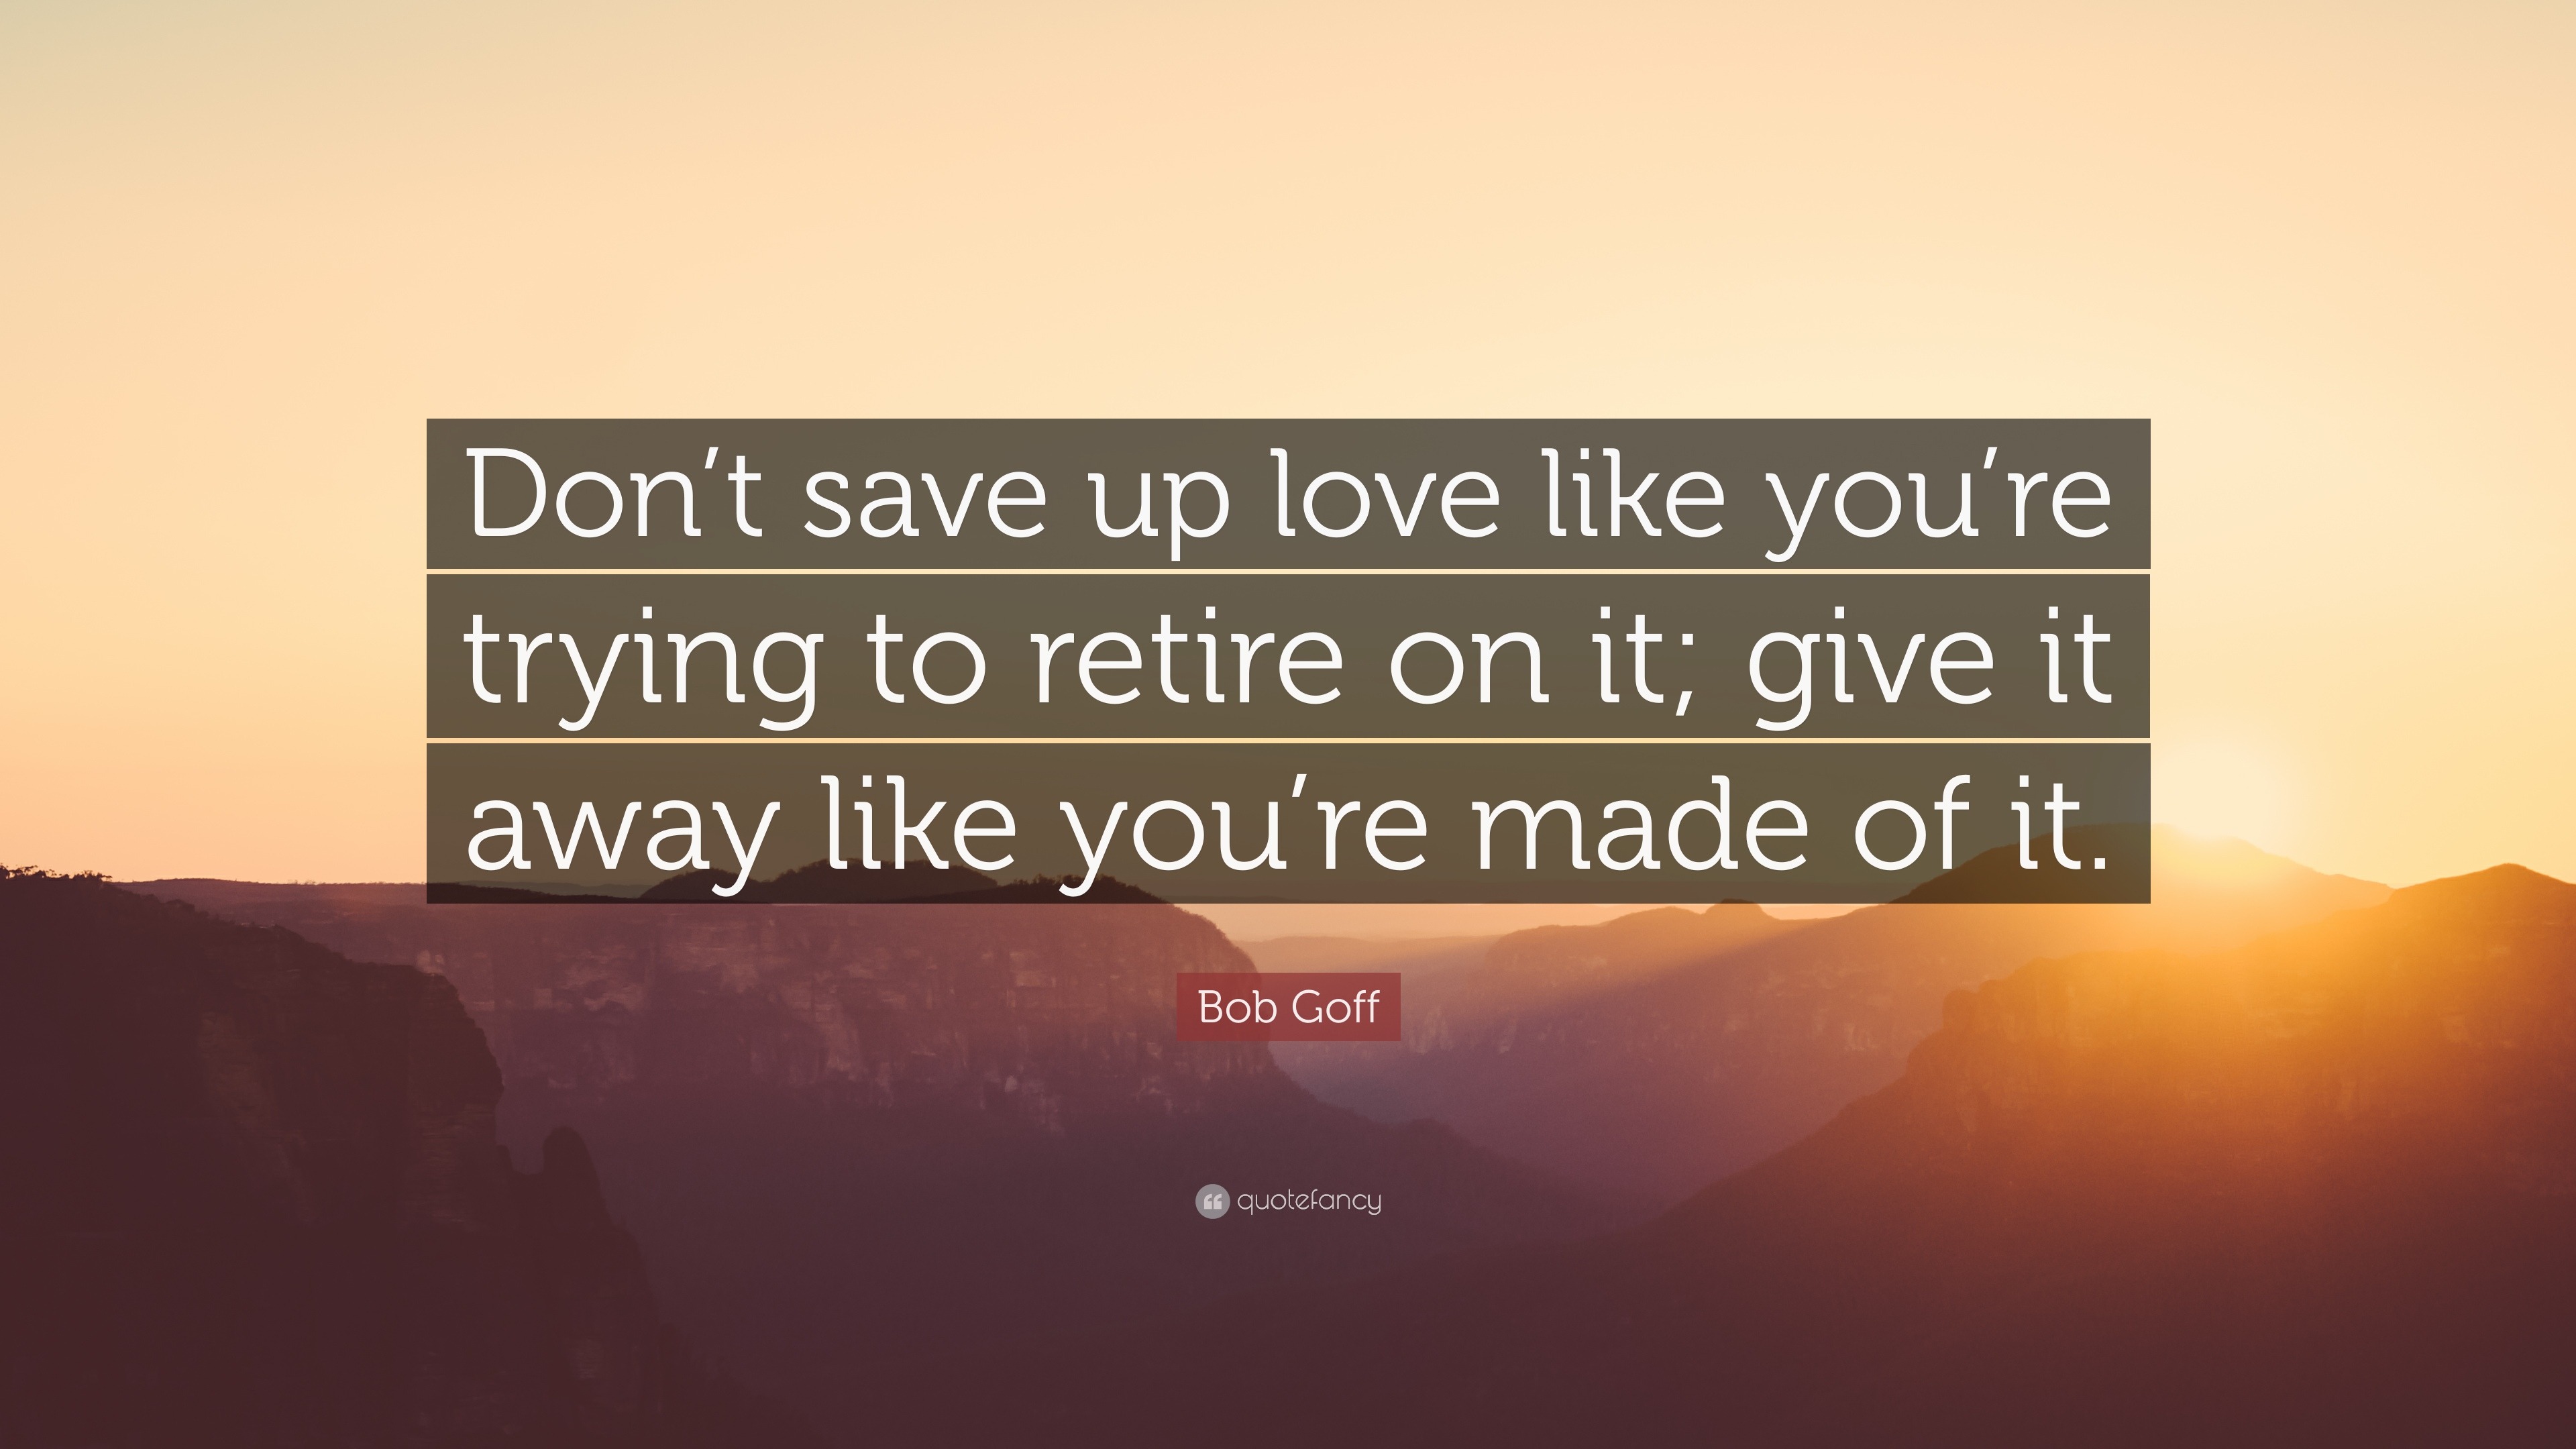 Bob Goff Quote “Don t save up love like you re trying